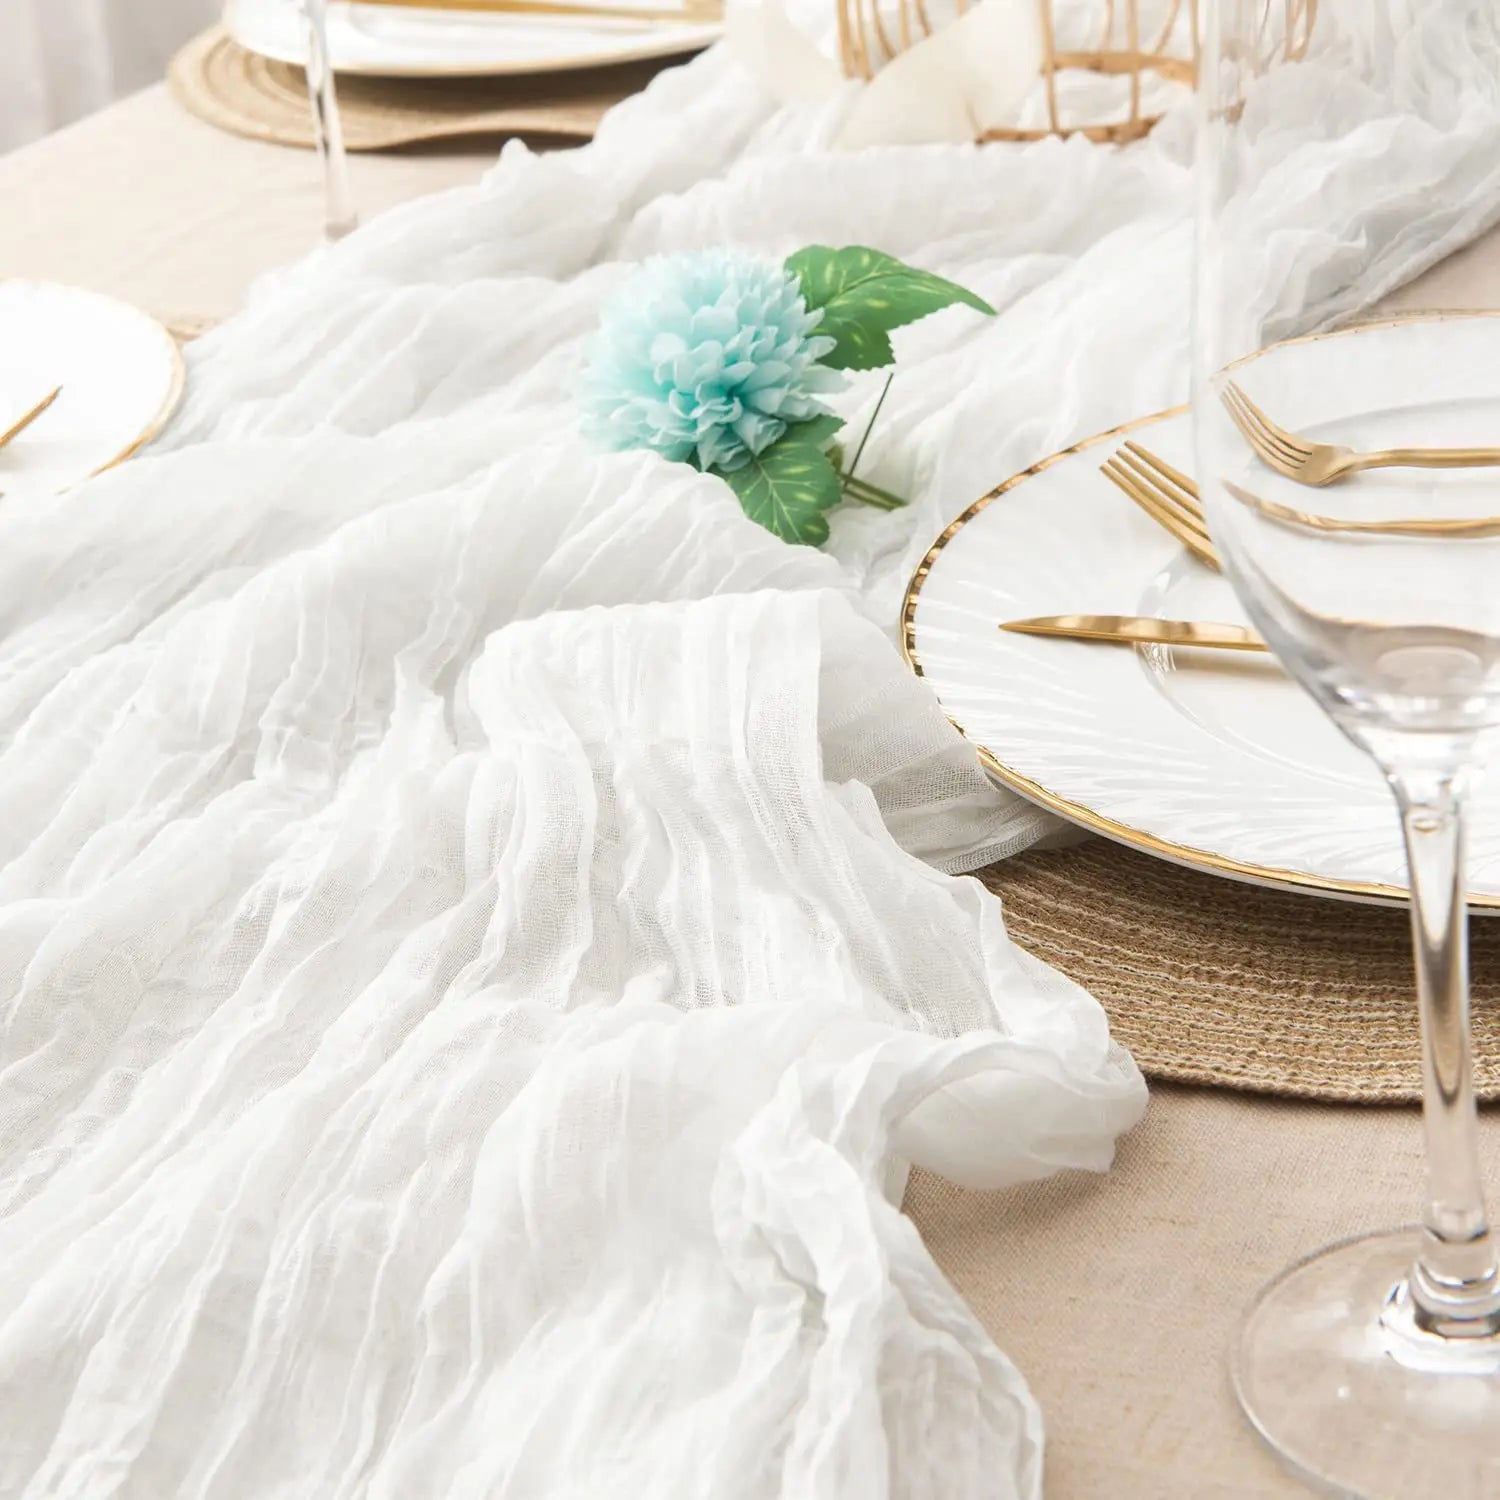 Cheesecloth Table Setting,Gauze Table Runner